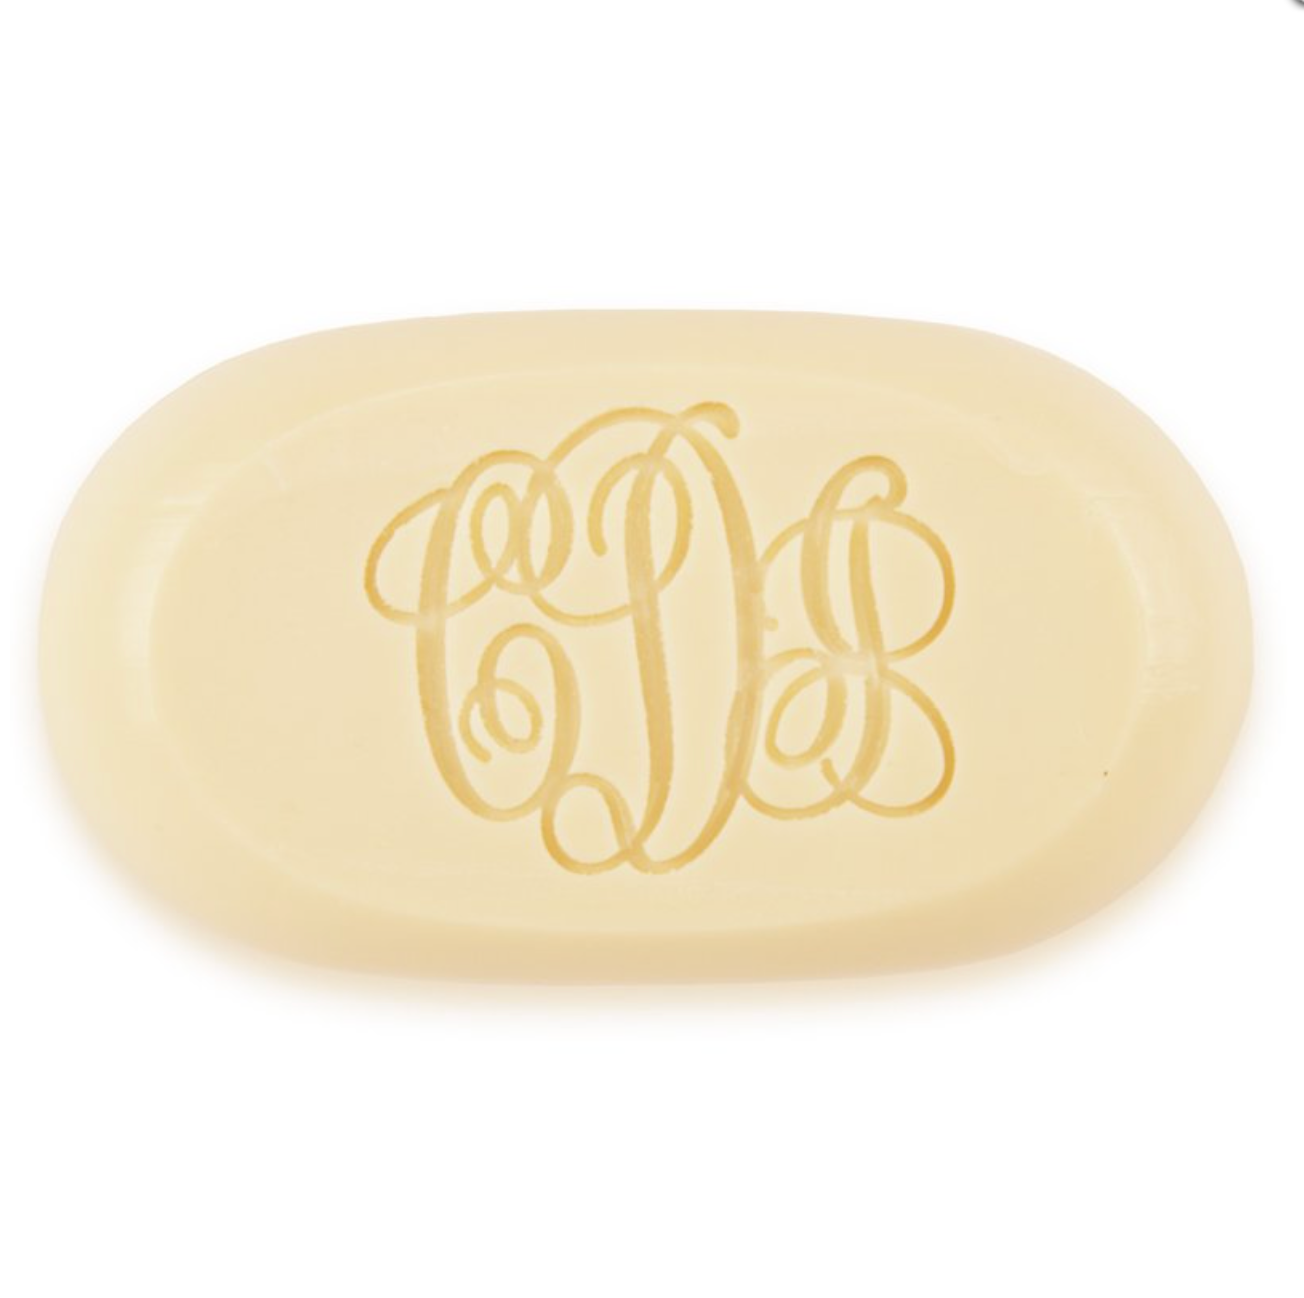 Engraved Soap